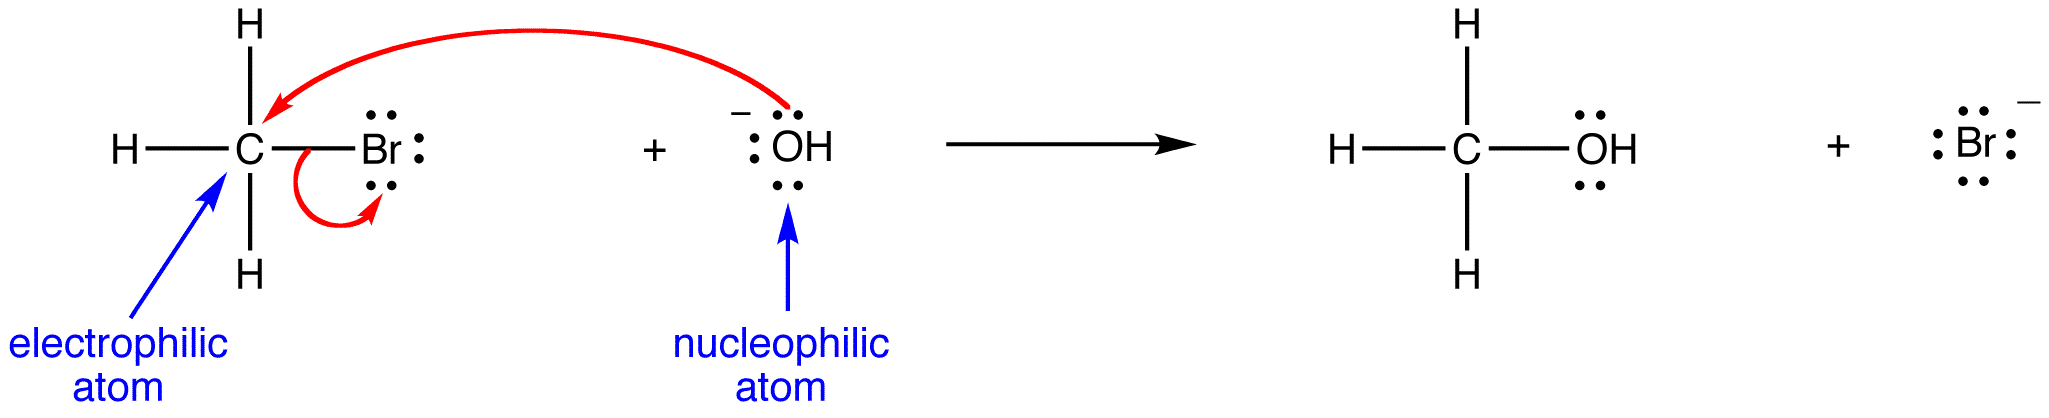 nucleophile1.png